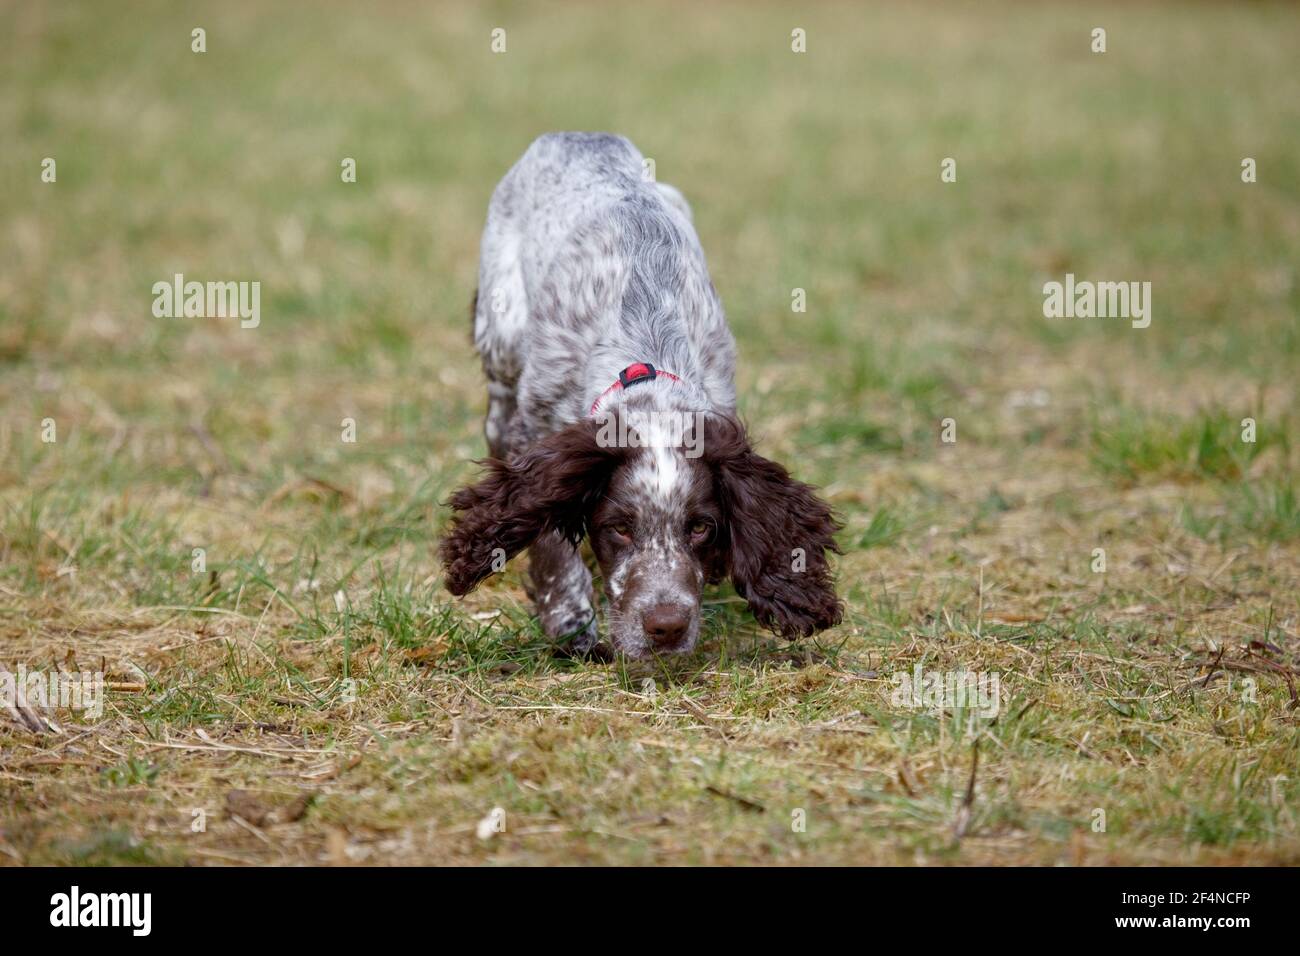 Cocker spaniel puppy sniffing the ground Stock Photo